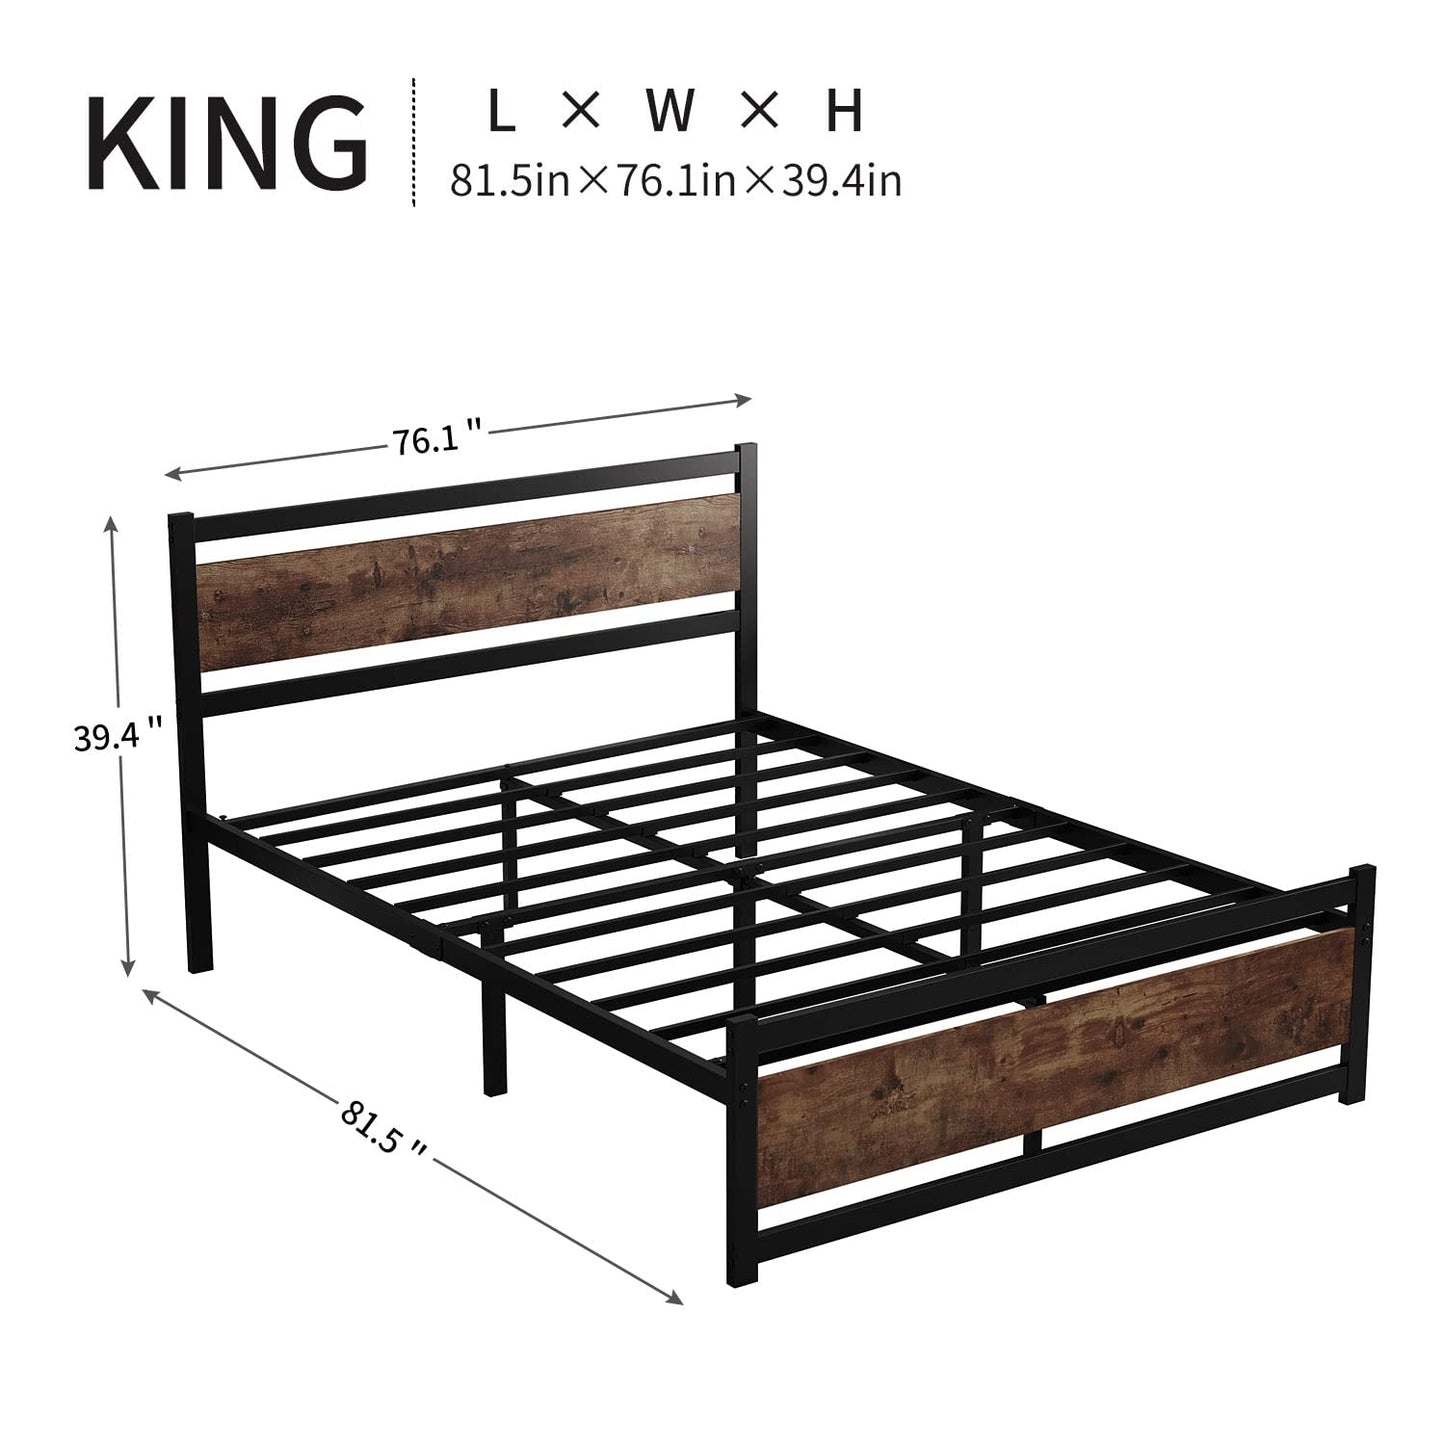 ZIORS King Size Bed Frame with Wooden Headboard, Heavy Duty Metal Platform Bed Frame, No Box Spring Needed, Mattress Foundation Platform,